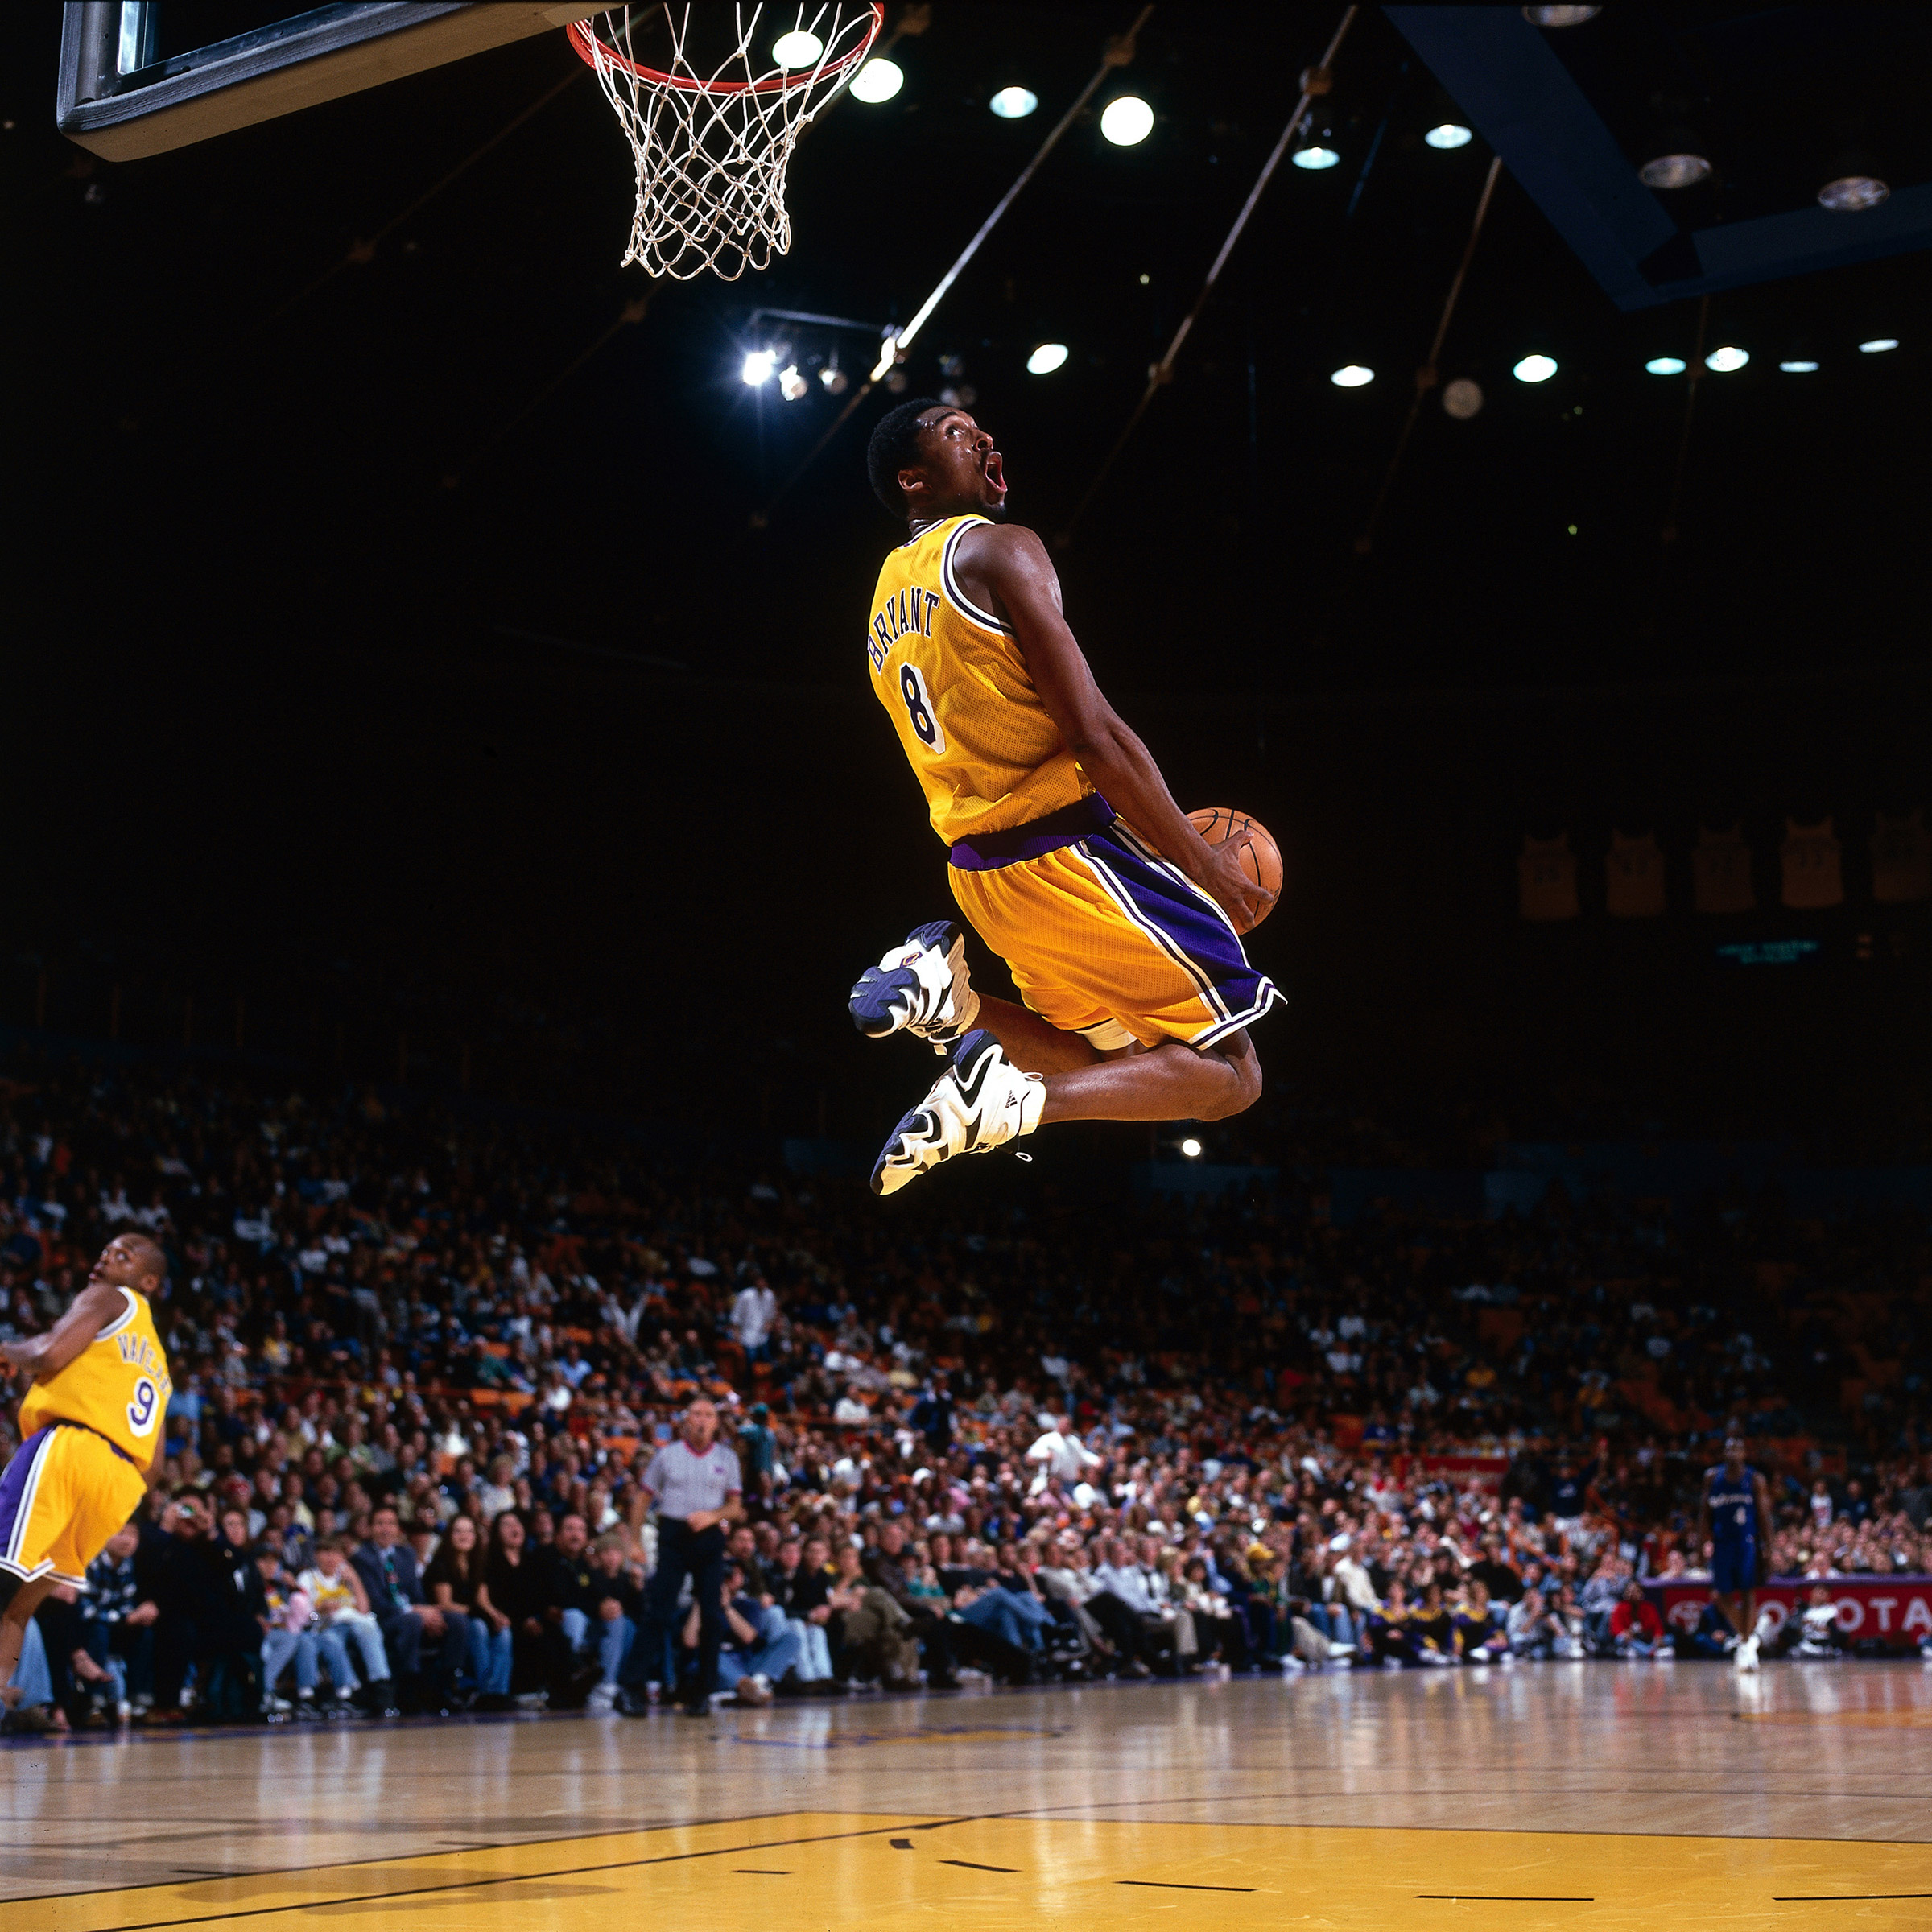 Bryant’s aerial displays were among the game’s most thrilling ever; here, a reverse slam in a 1998 home game